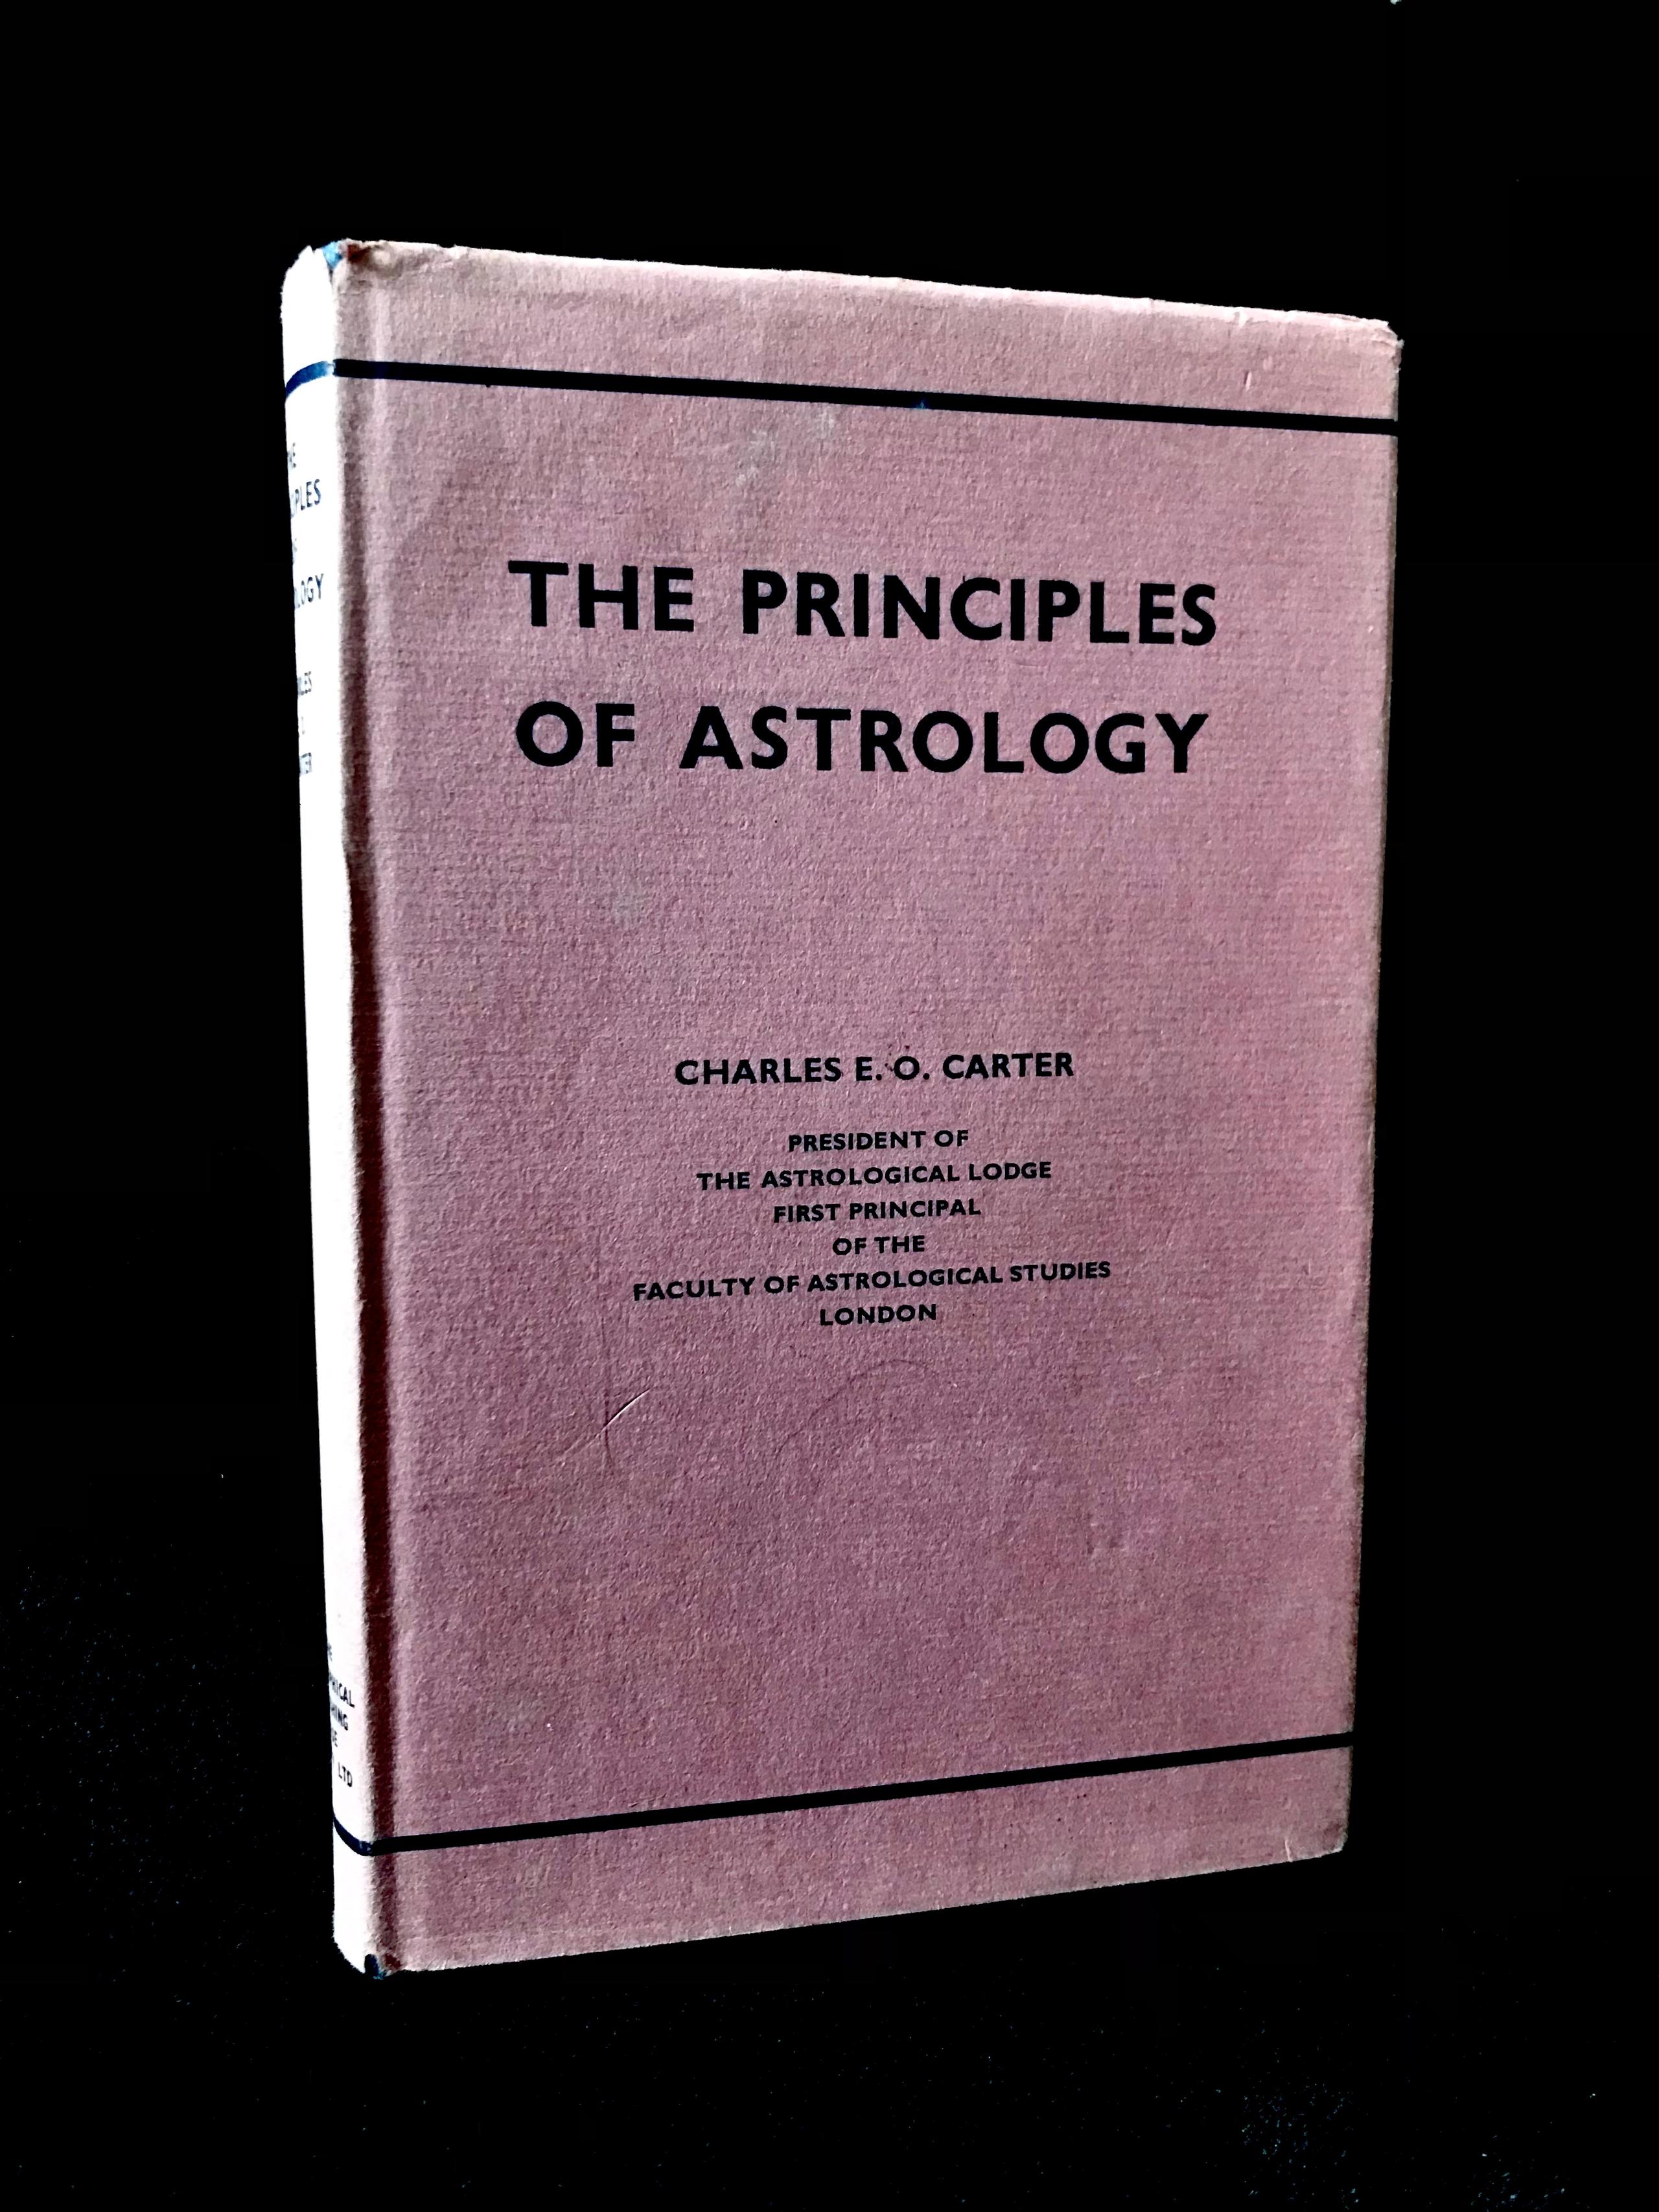 The Principles Of Astrology by Charles E. O. Carter